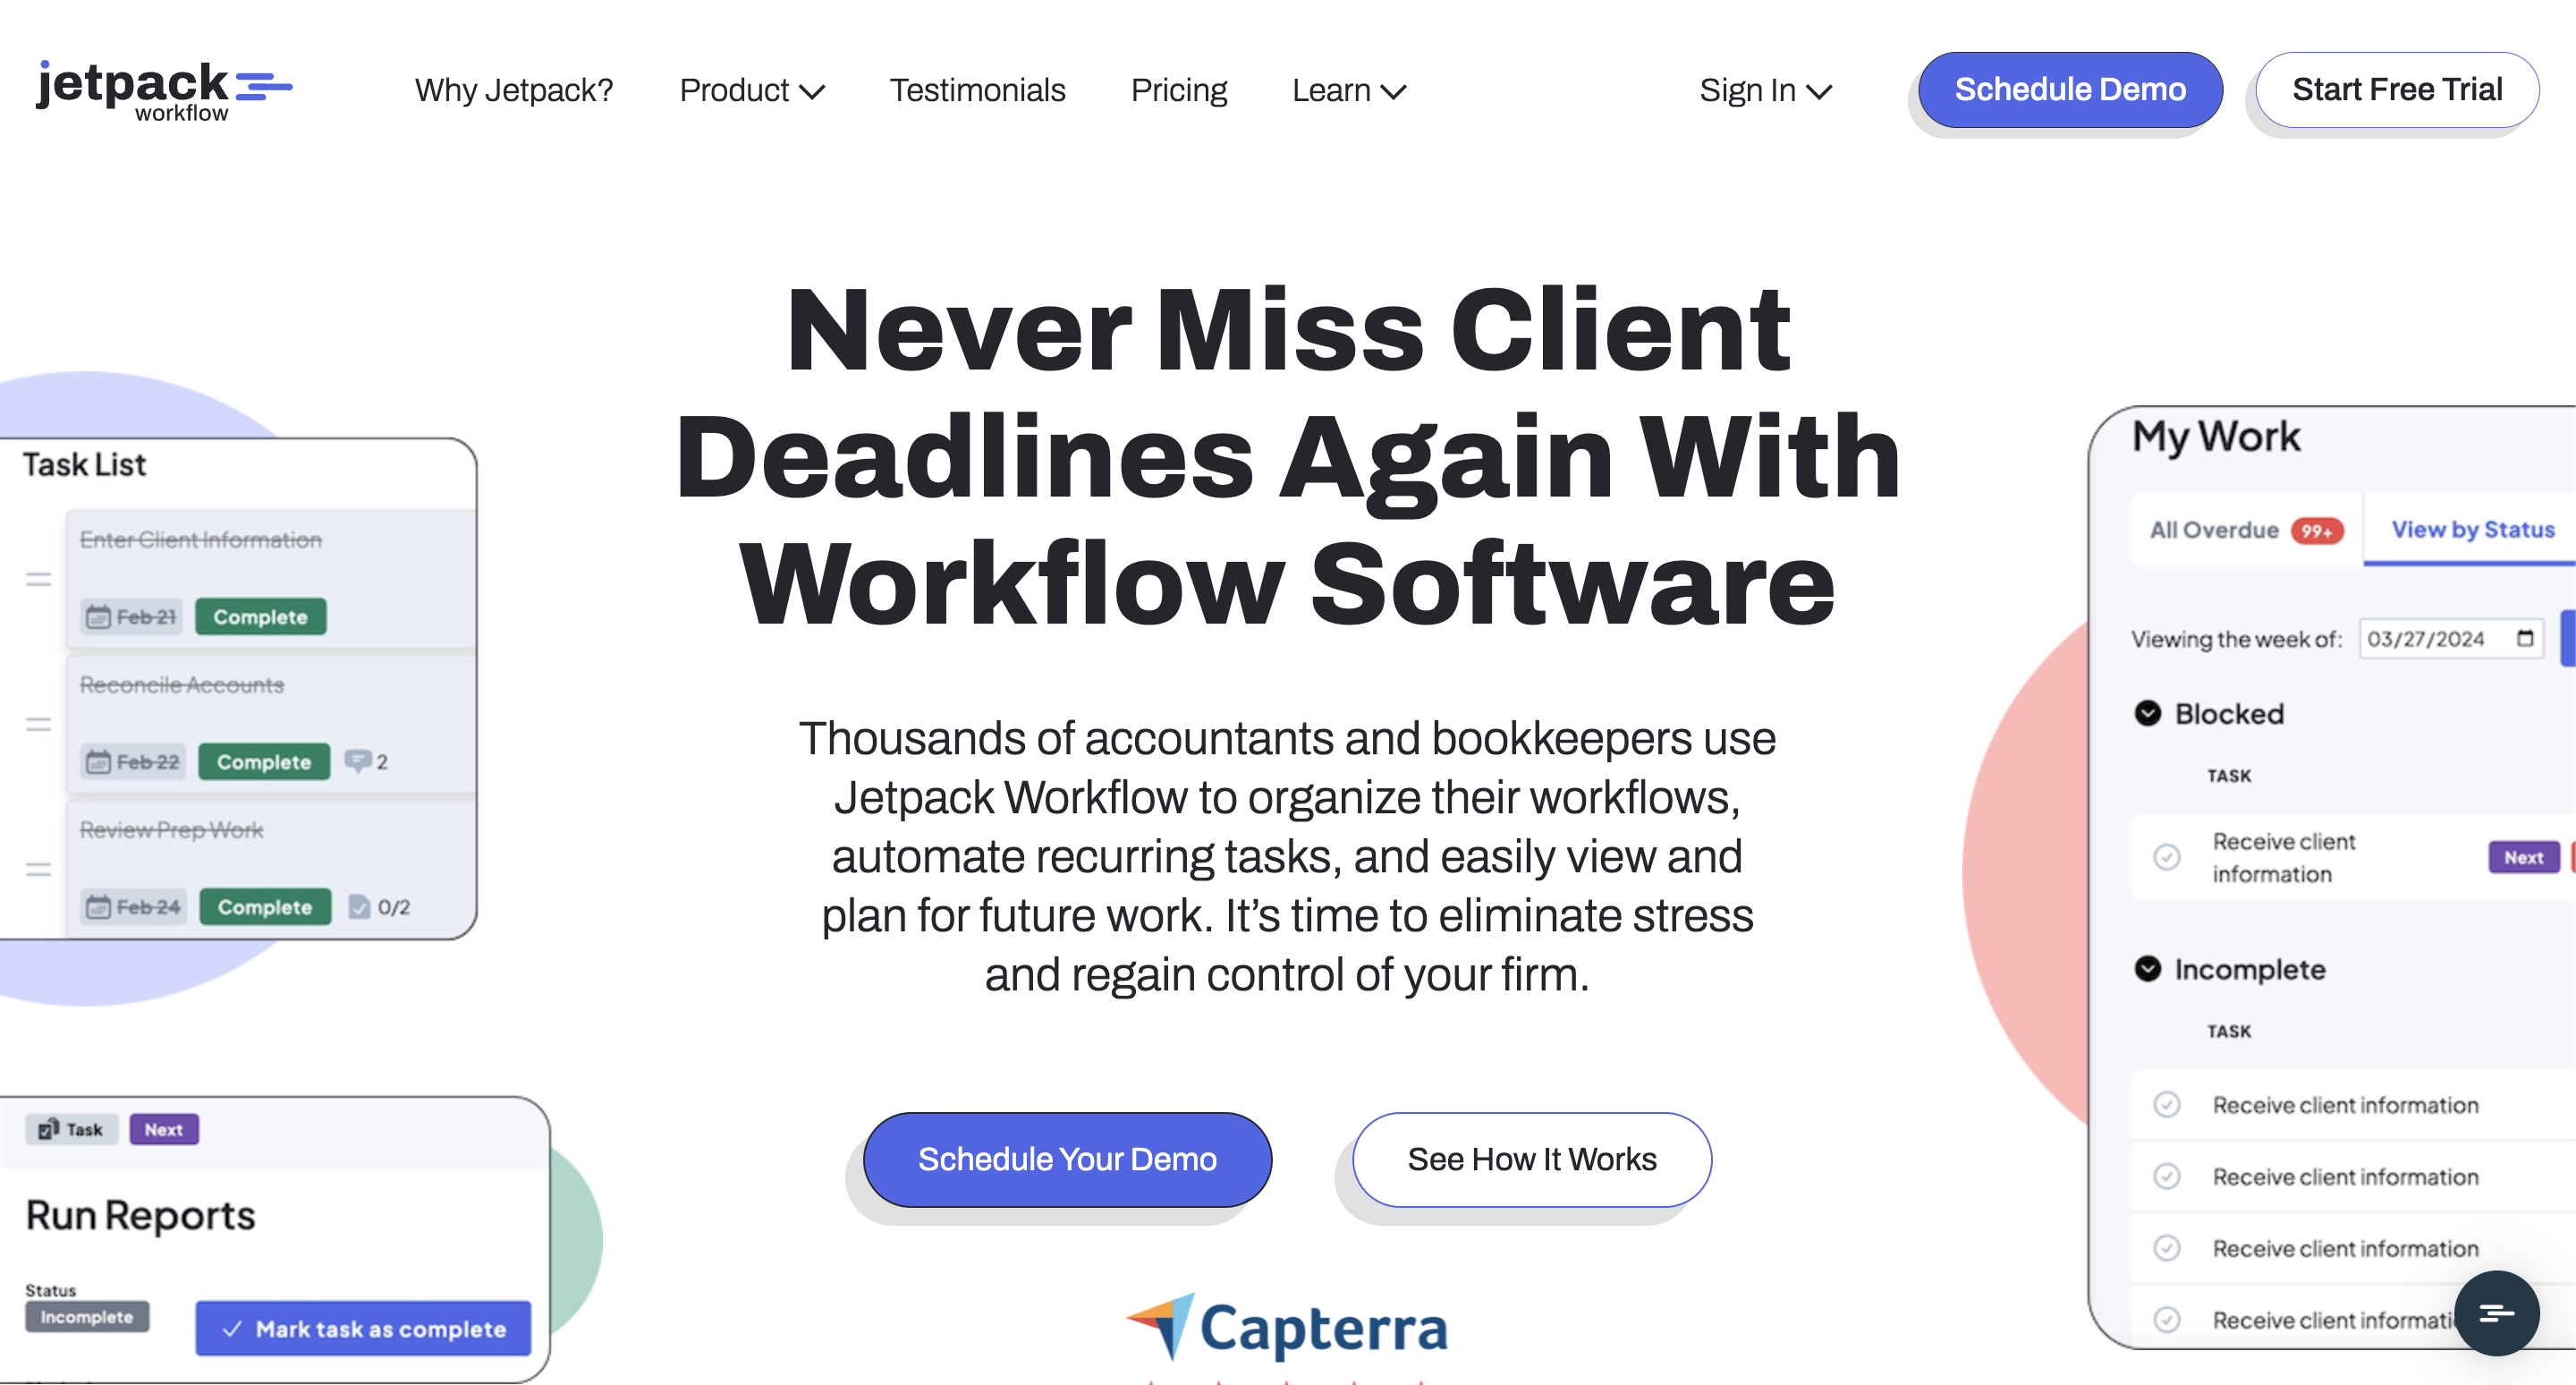 project management software best for accounting - jetpack workflow